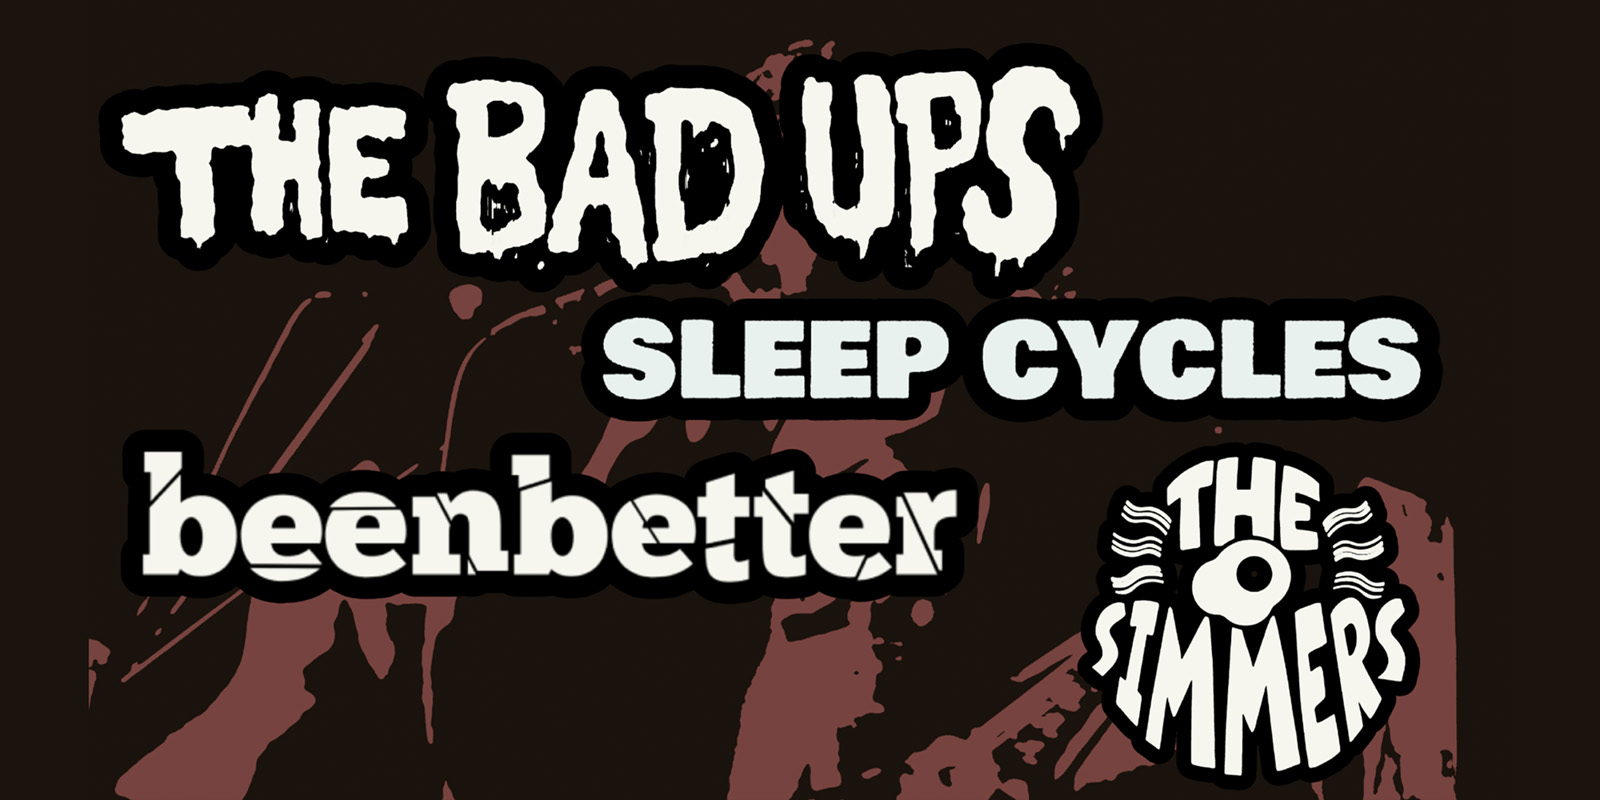 The Bad Ups, Sleep Cycles, Beenbetter, The Simmers at Rivet on Saturday, May 20th, 2023!